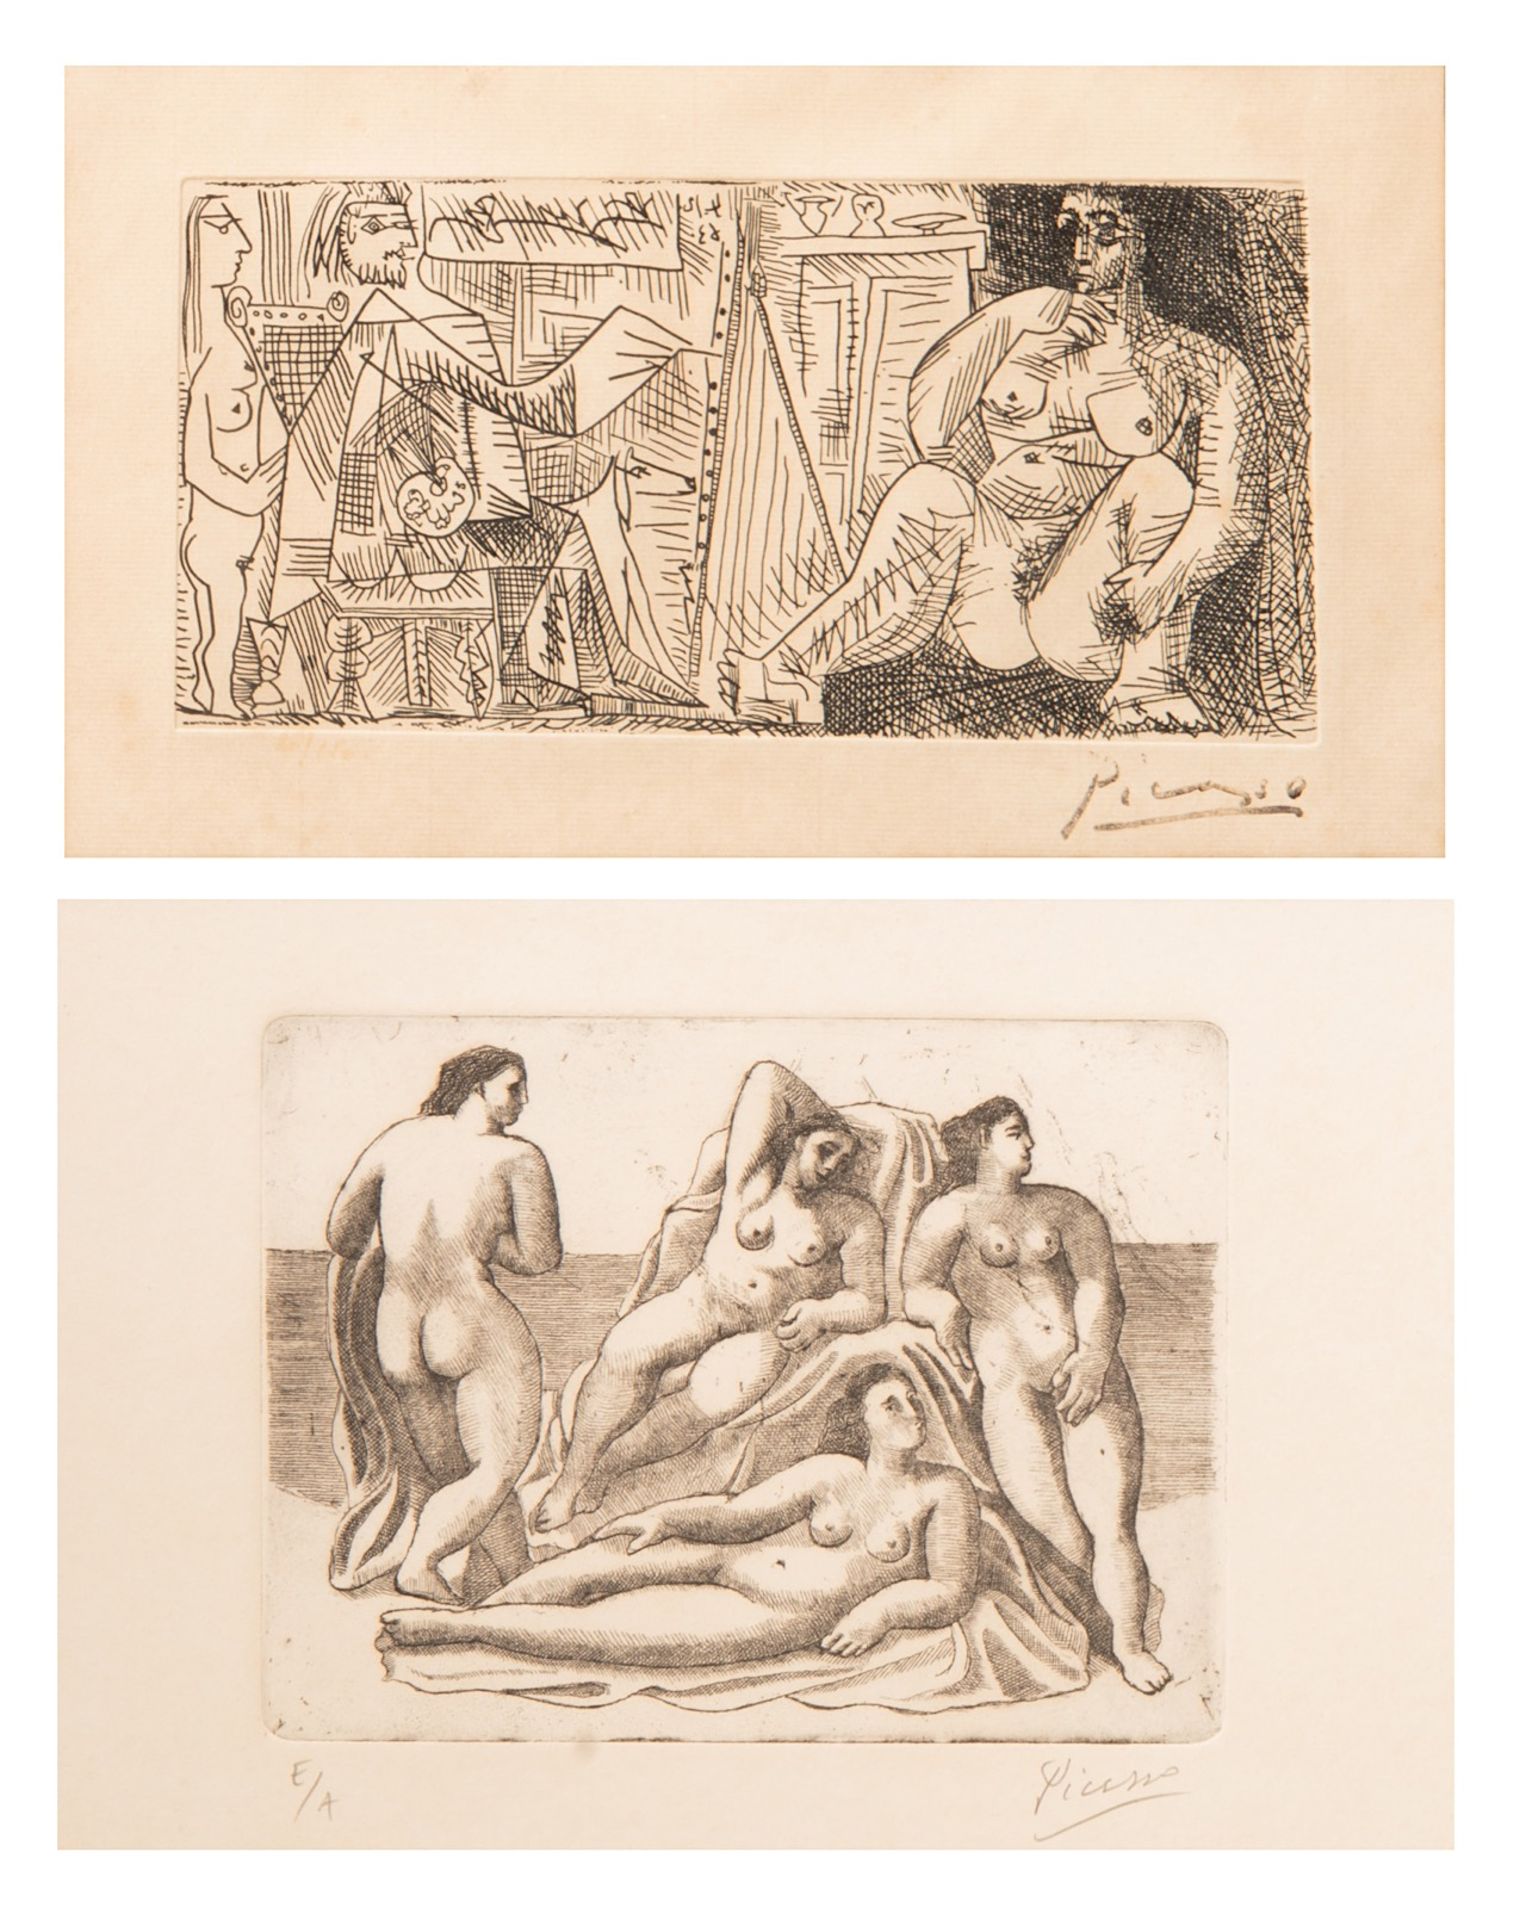 Picasso Pablo (1881-1973), 'The Painter and his Models', etching, numbered bottom left 20/150, plate